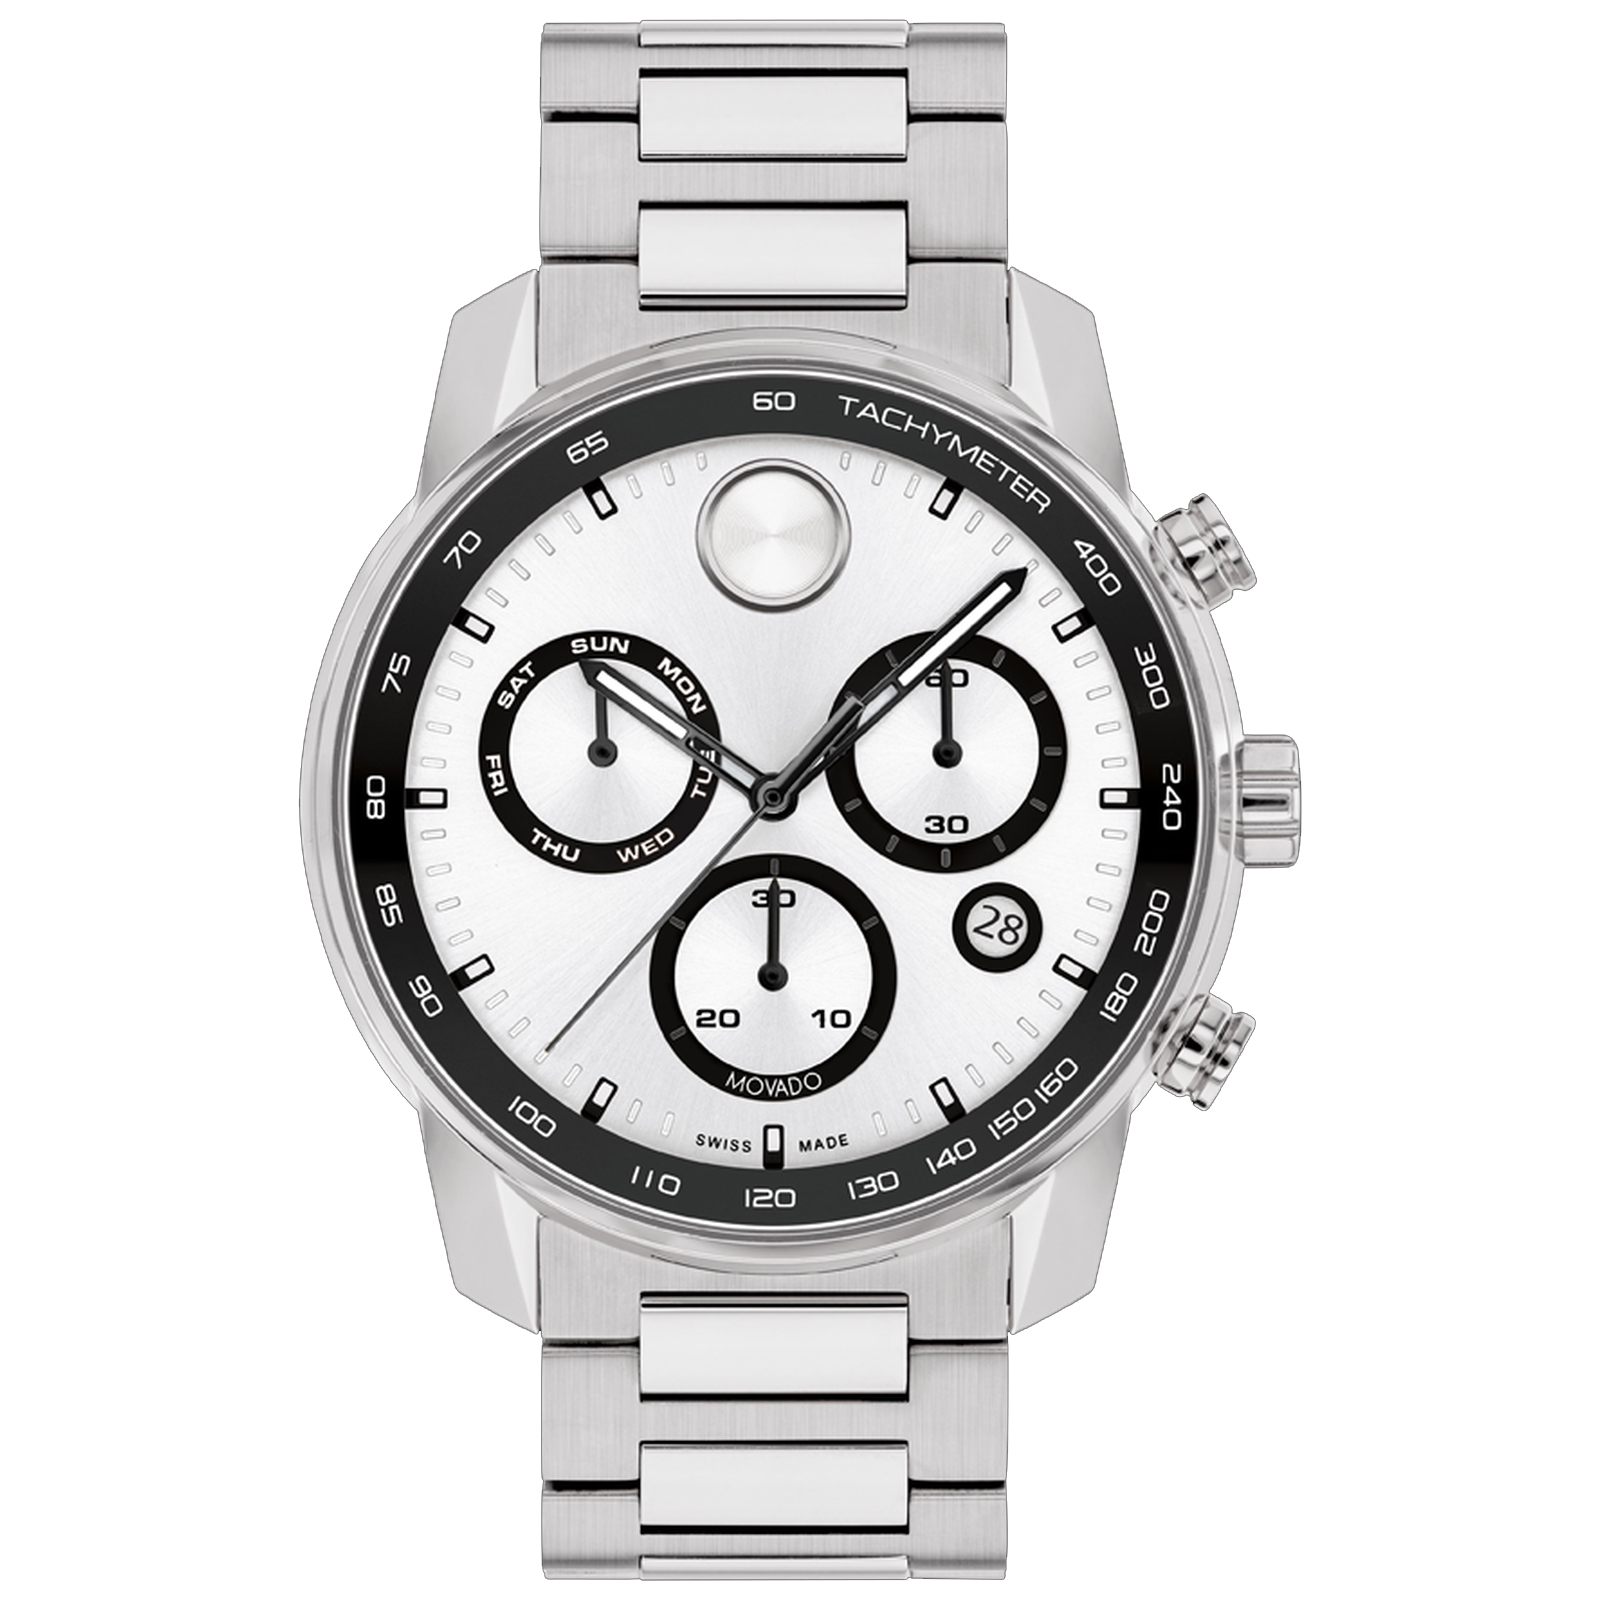 BOLD Verso Chronograph Silver-Tone Dial Stainless Steel Watch 44mm - Movado 3600905